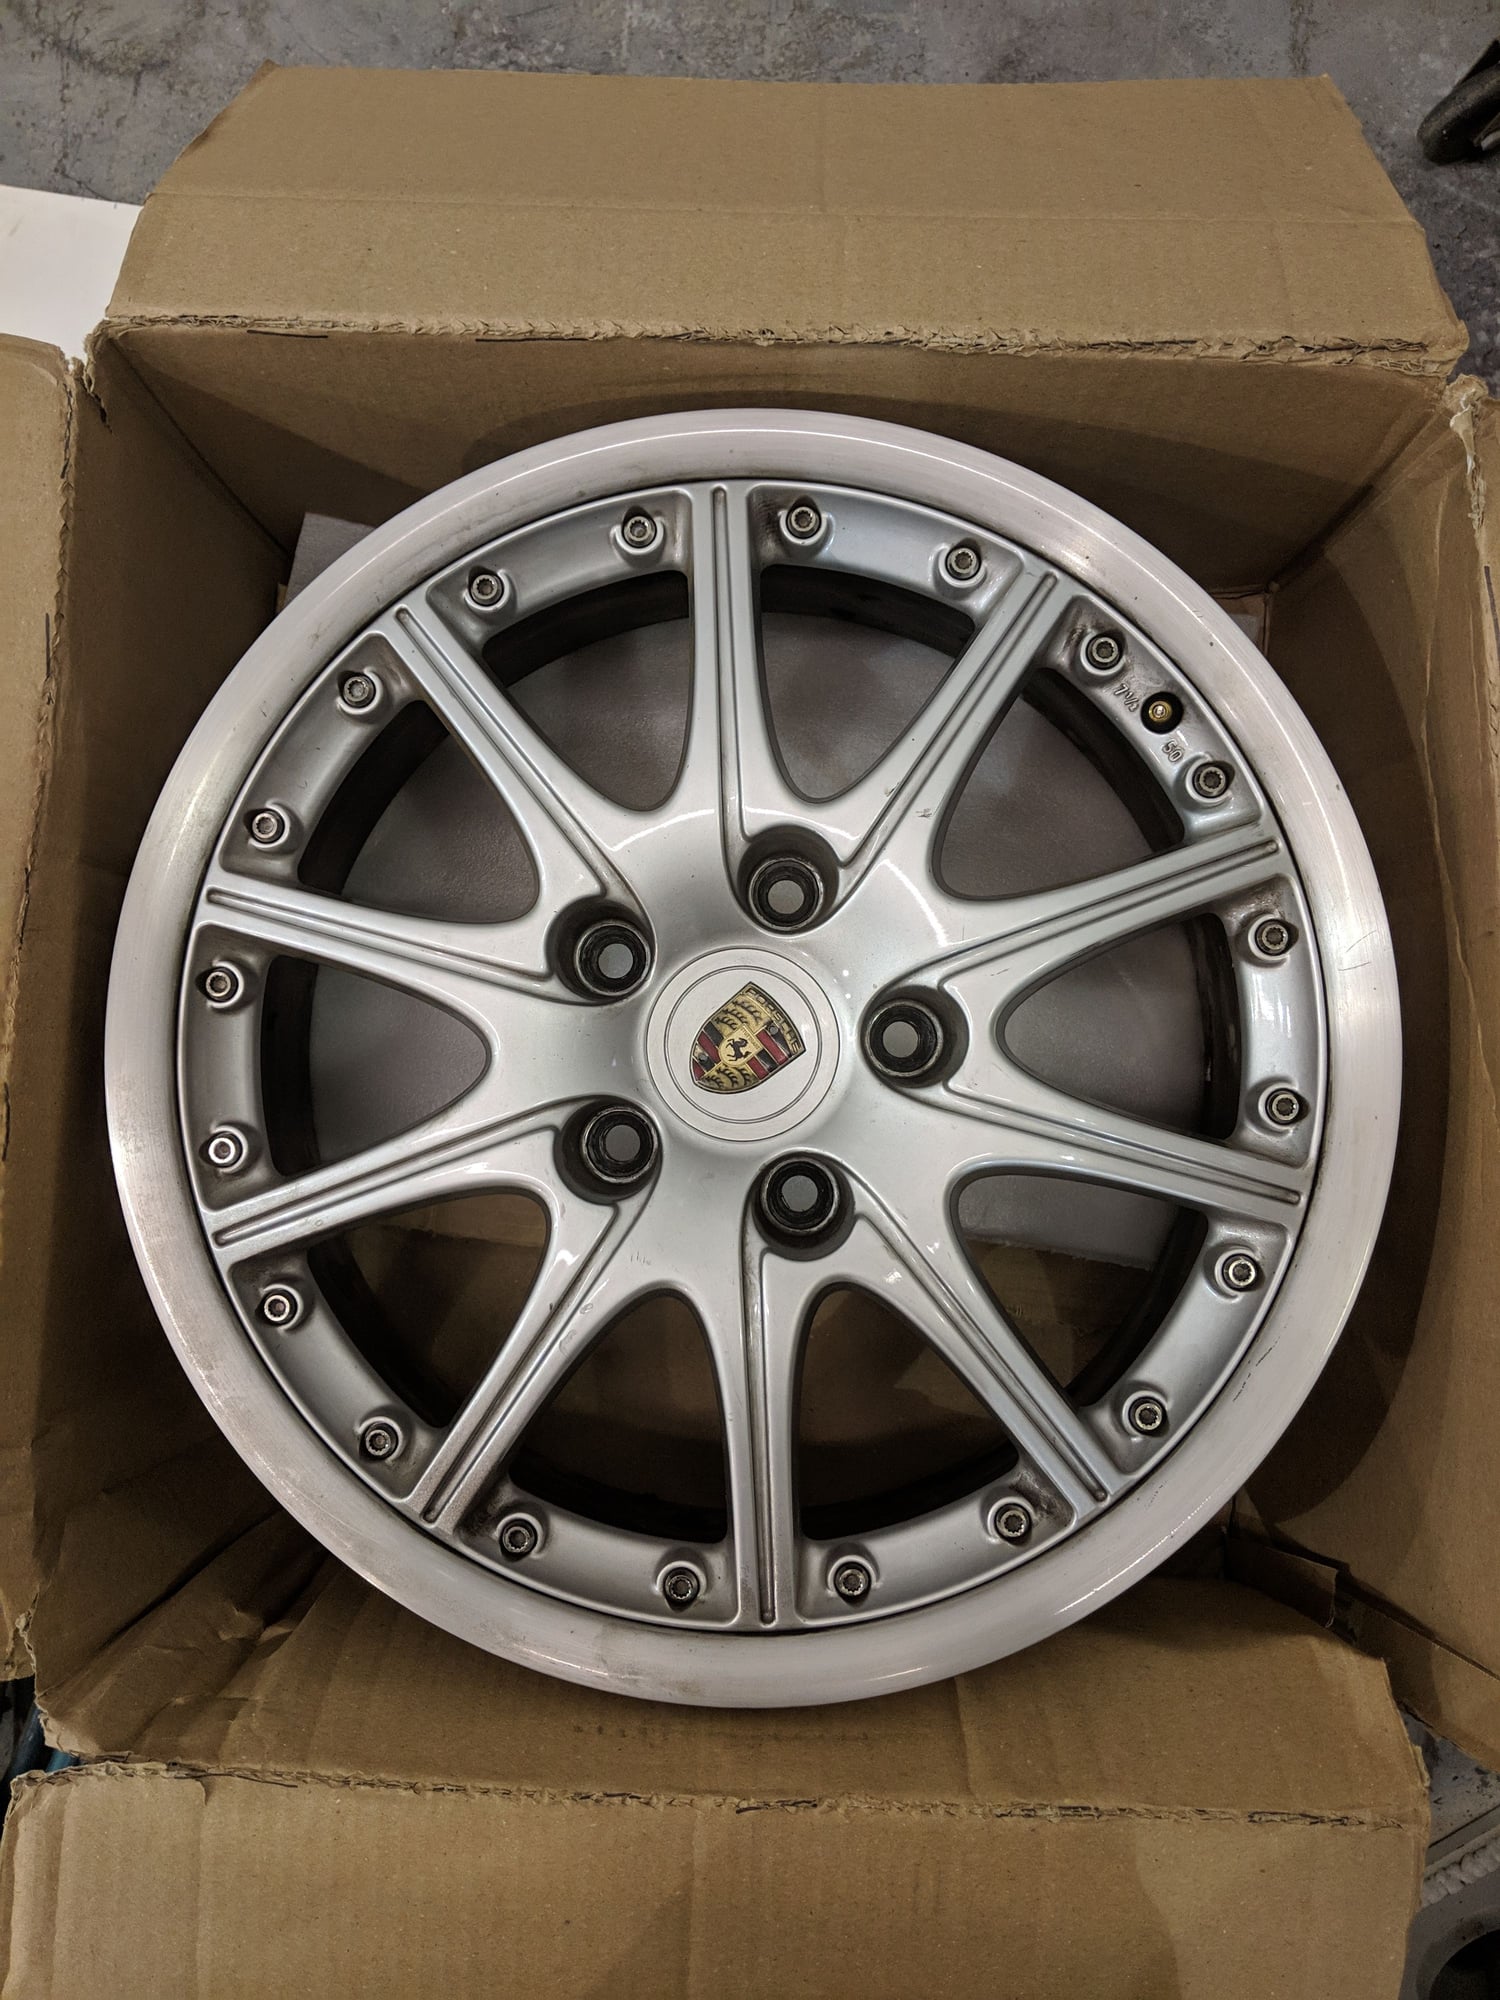 Wheels and Tires/Axles - 996 Sport Design BBS wheels - Used - 1999 to 2004 Porsche 911 - Wellesley Hills, MA 02481, United States